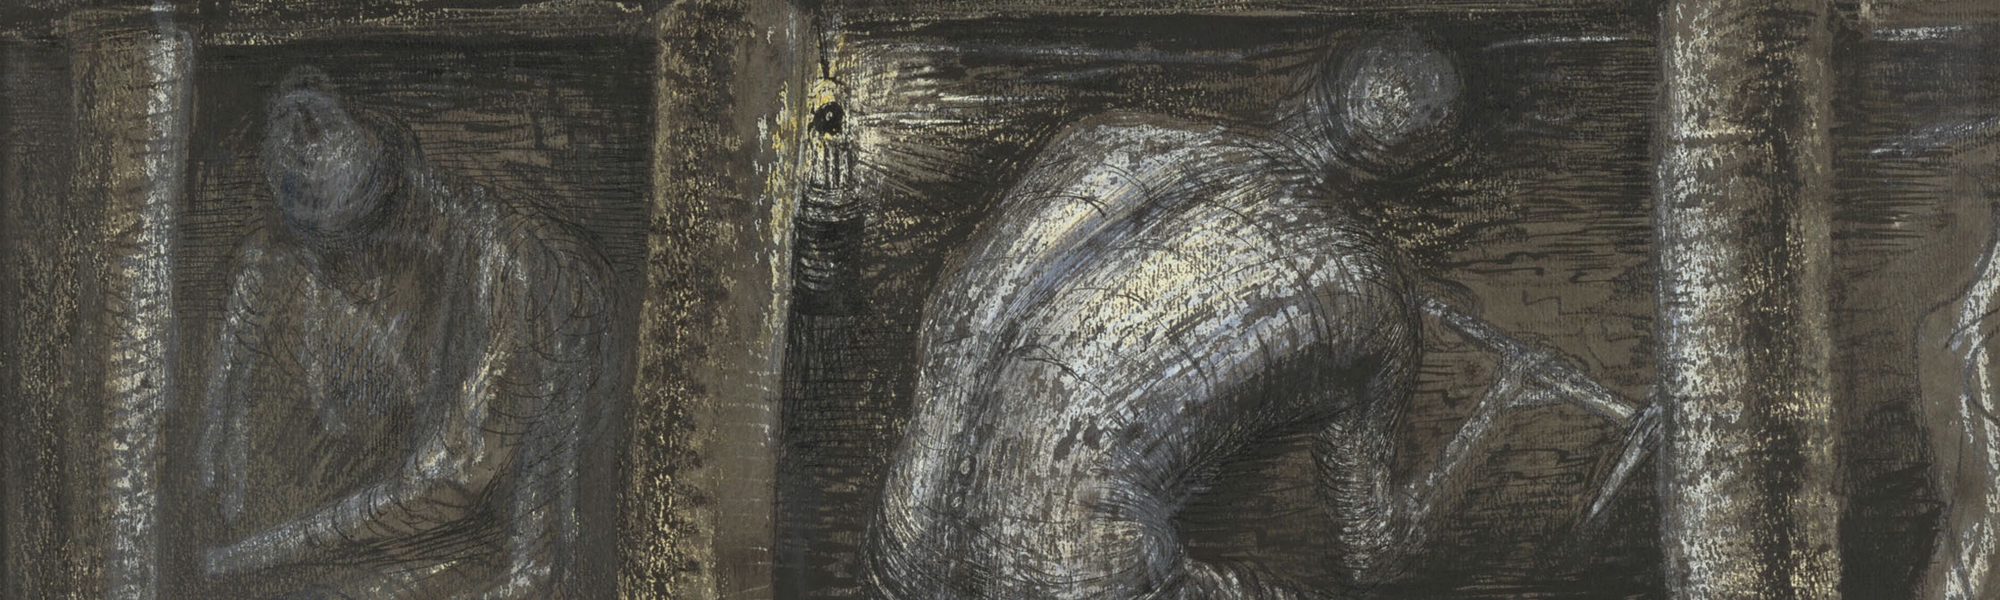 Henry Moore's drawing of coalminers